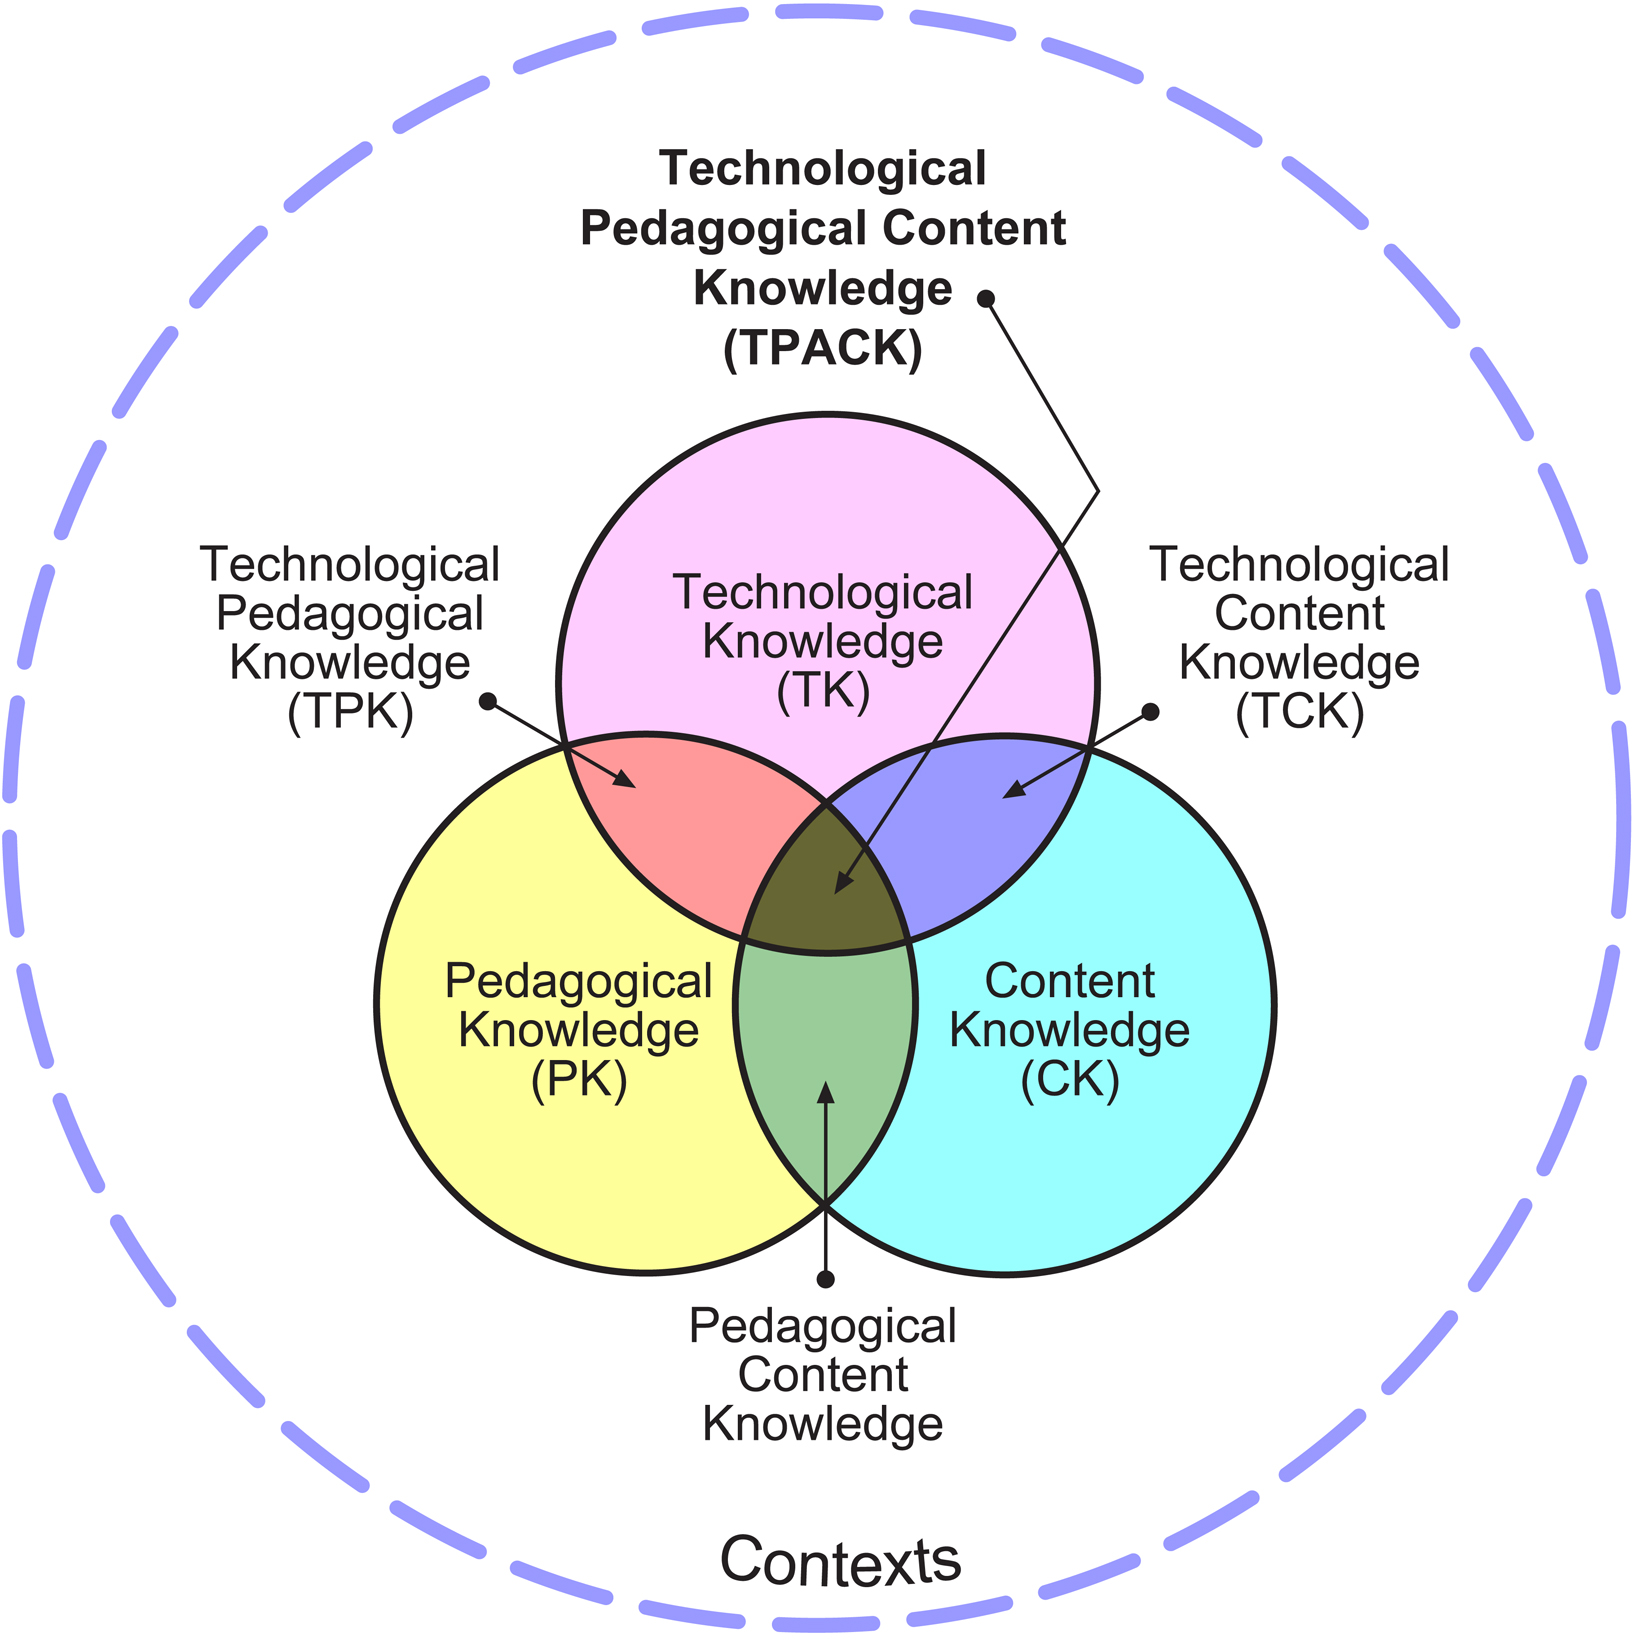 Image of the Technological Pedagogical Content Knowledge or T PACK diagram, showing three overlapping circles set up as a Venn Diagram. The center of each circle is a vertex of an equilateral triangle so all three circles overlap each other similarly, with three regions showing the overlap of two of the regions, and a region in the center where all three circles overlap. Each circle represents one type of knowledge: either technological, pedagogical, or content (such as mathematics). Regions where two circles overlap are labeled as one of: technological pedagogical knowledge or T P K, technological content knowledge or T C K, or pedagogical content knowledge or P C K. The center region where all three circles overlap is labeled technological pedagogical content knowledge or T PACK. Outside all overlapping circles and labels is a large dashed circle which is labeled contexts.